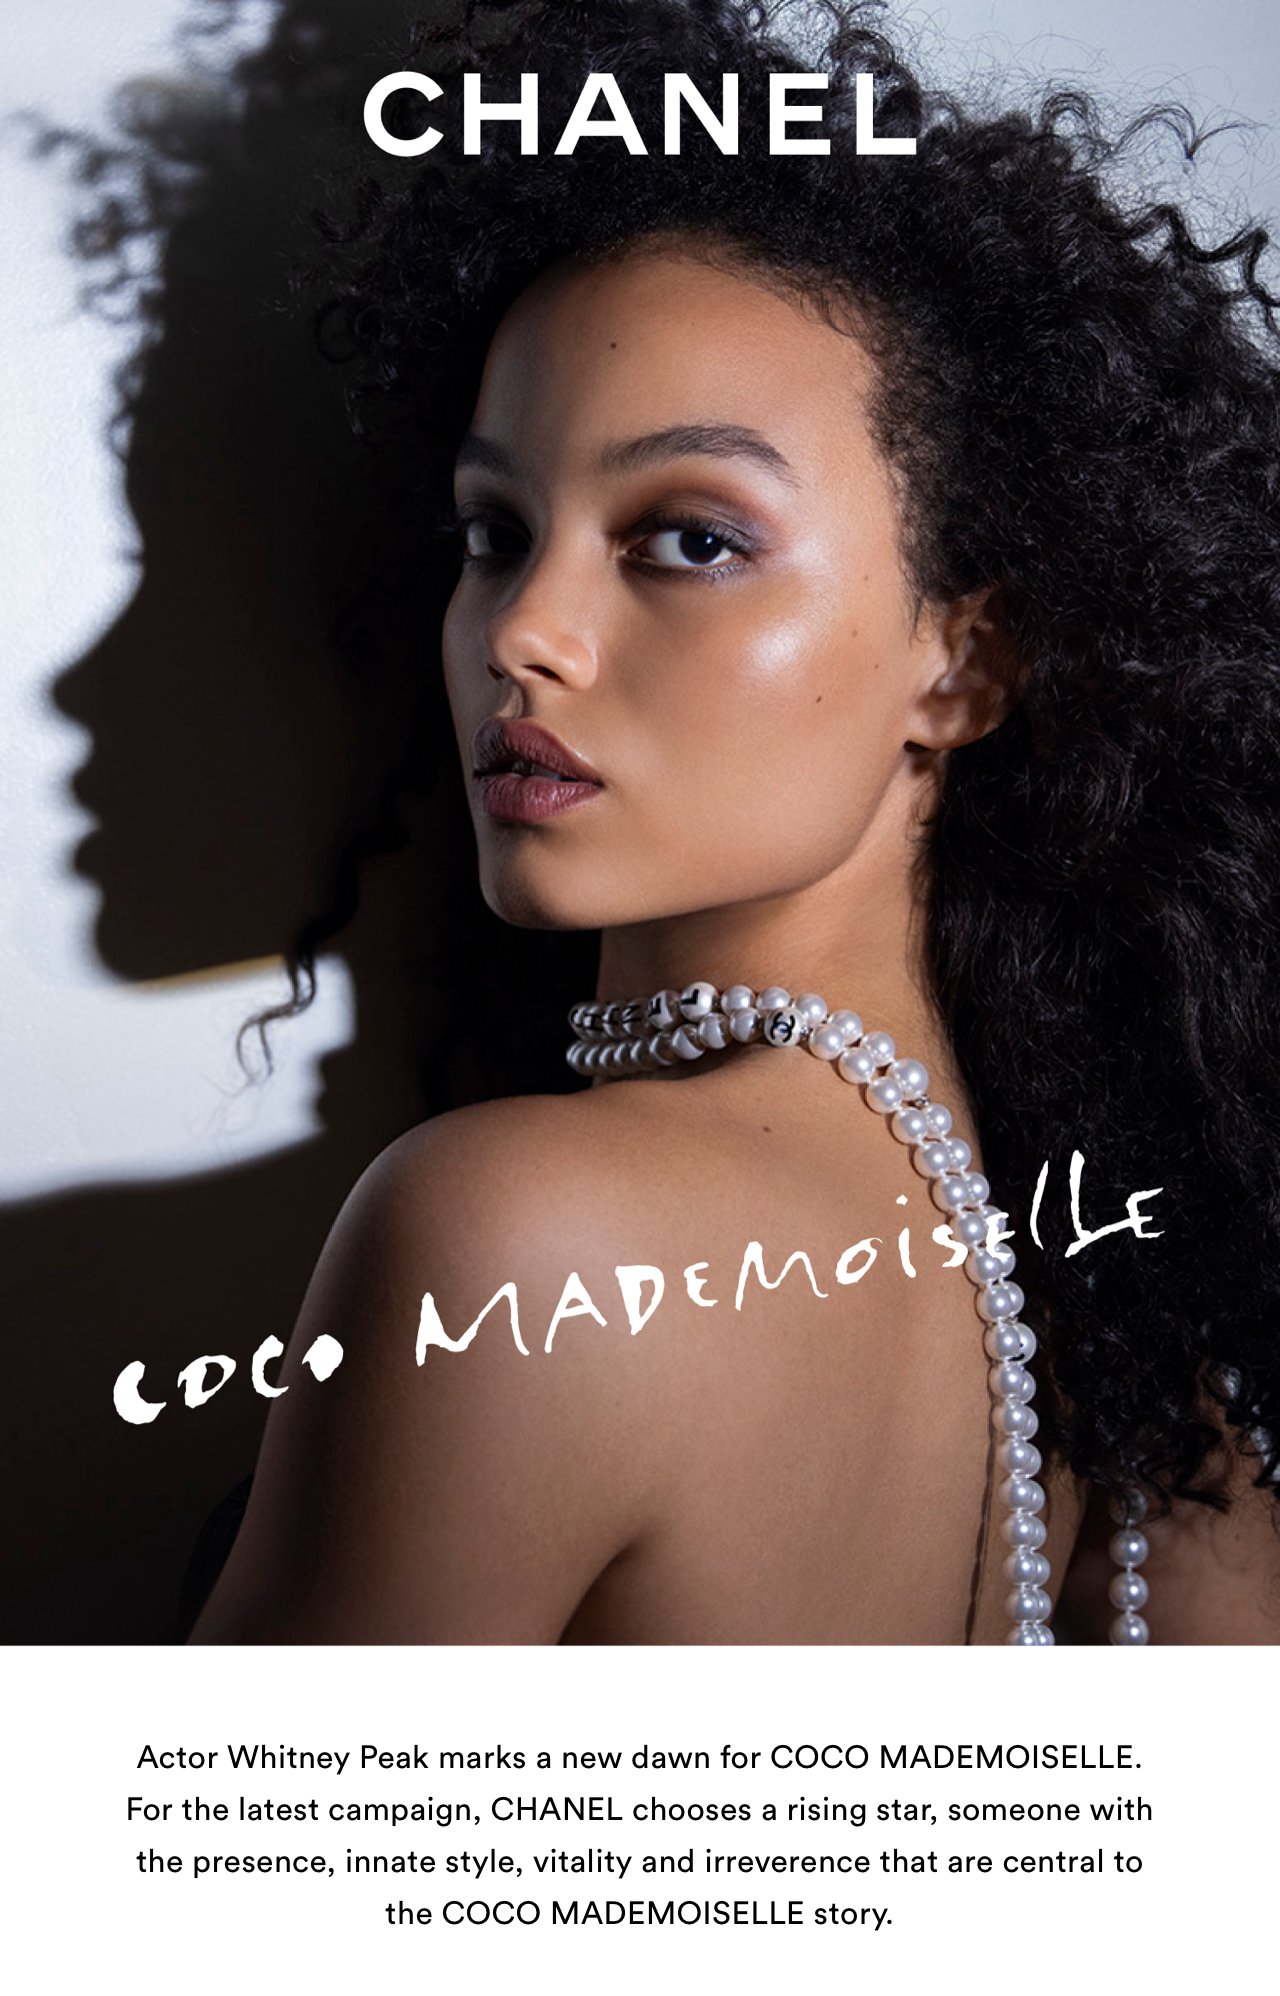 Ulta Beauty: The new face of CHANEL COCO MADEMOISELLE